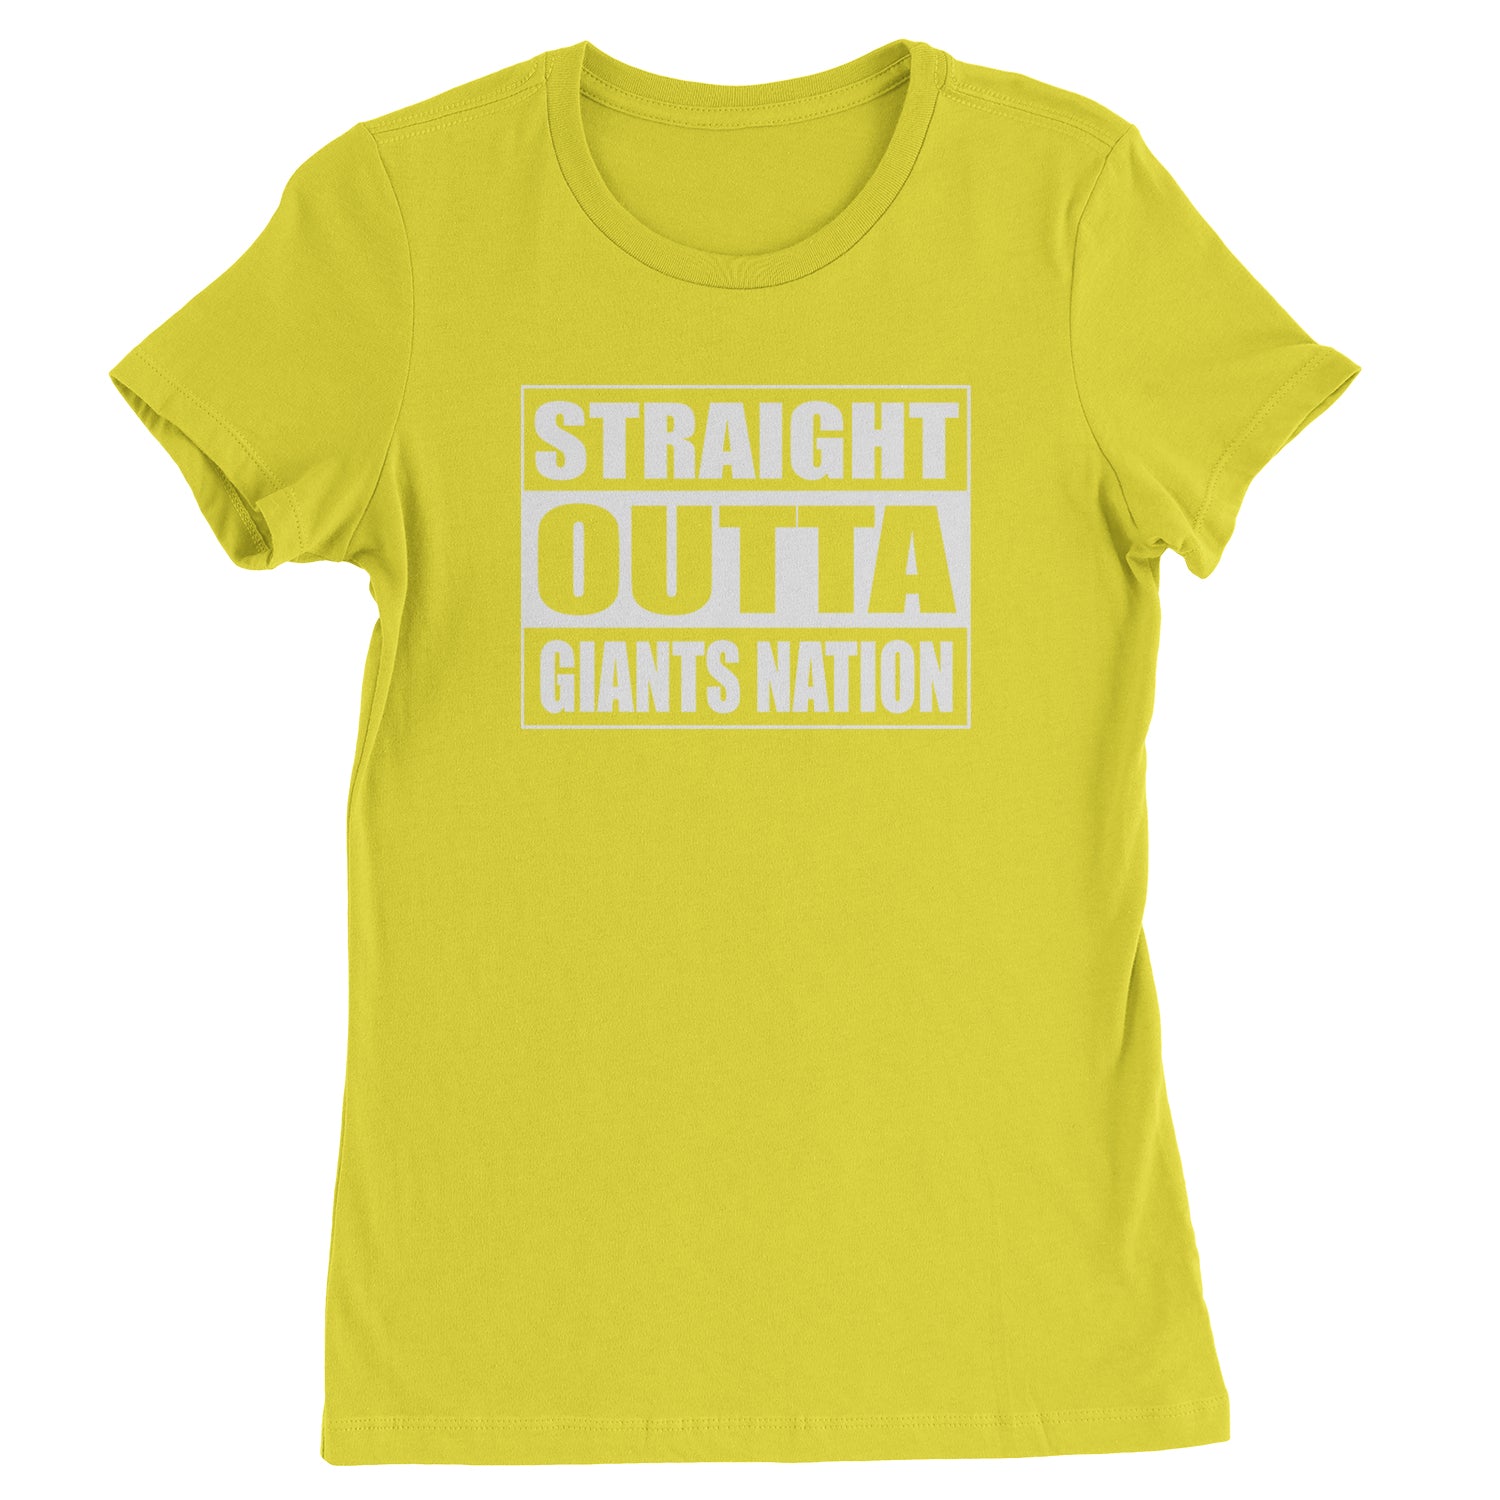 Straight Outta Giants Nation Womens T-shirt bleed, blue, football, giants, new, ny, york by Expression Tees